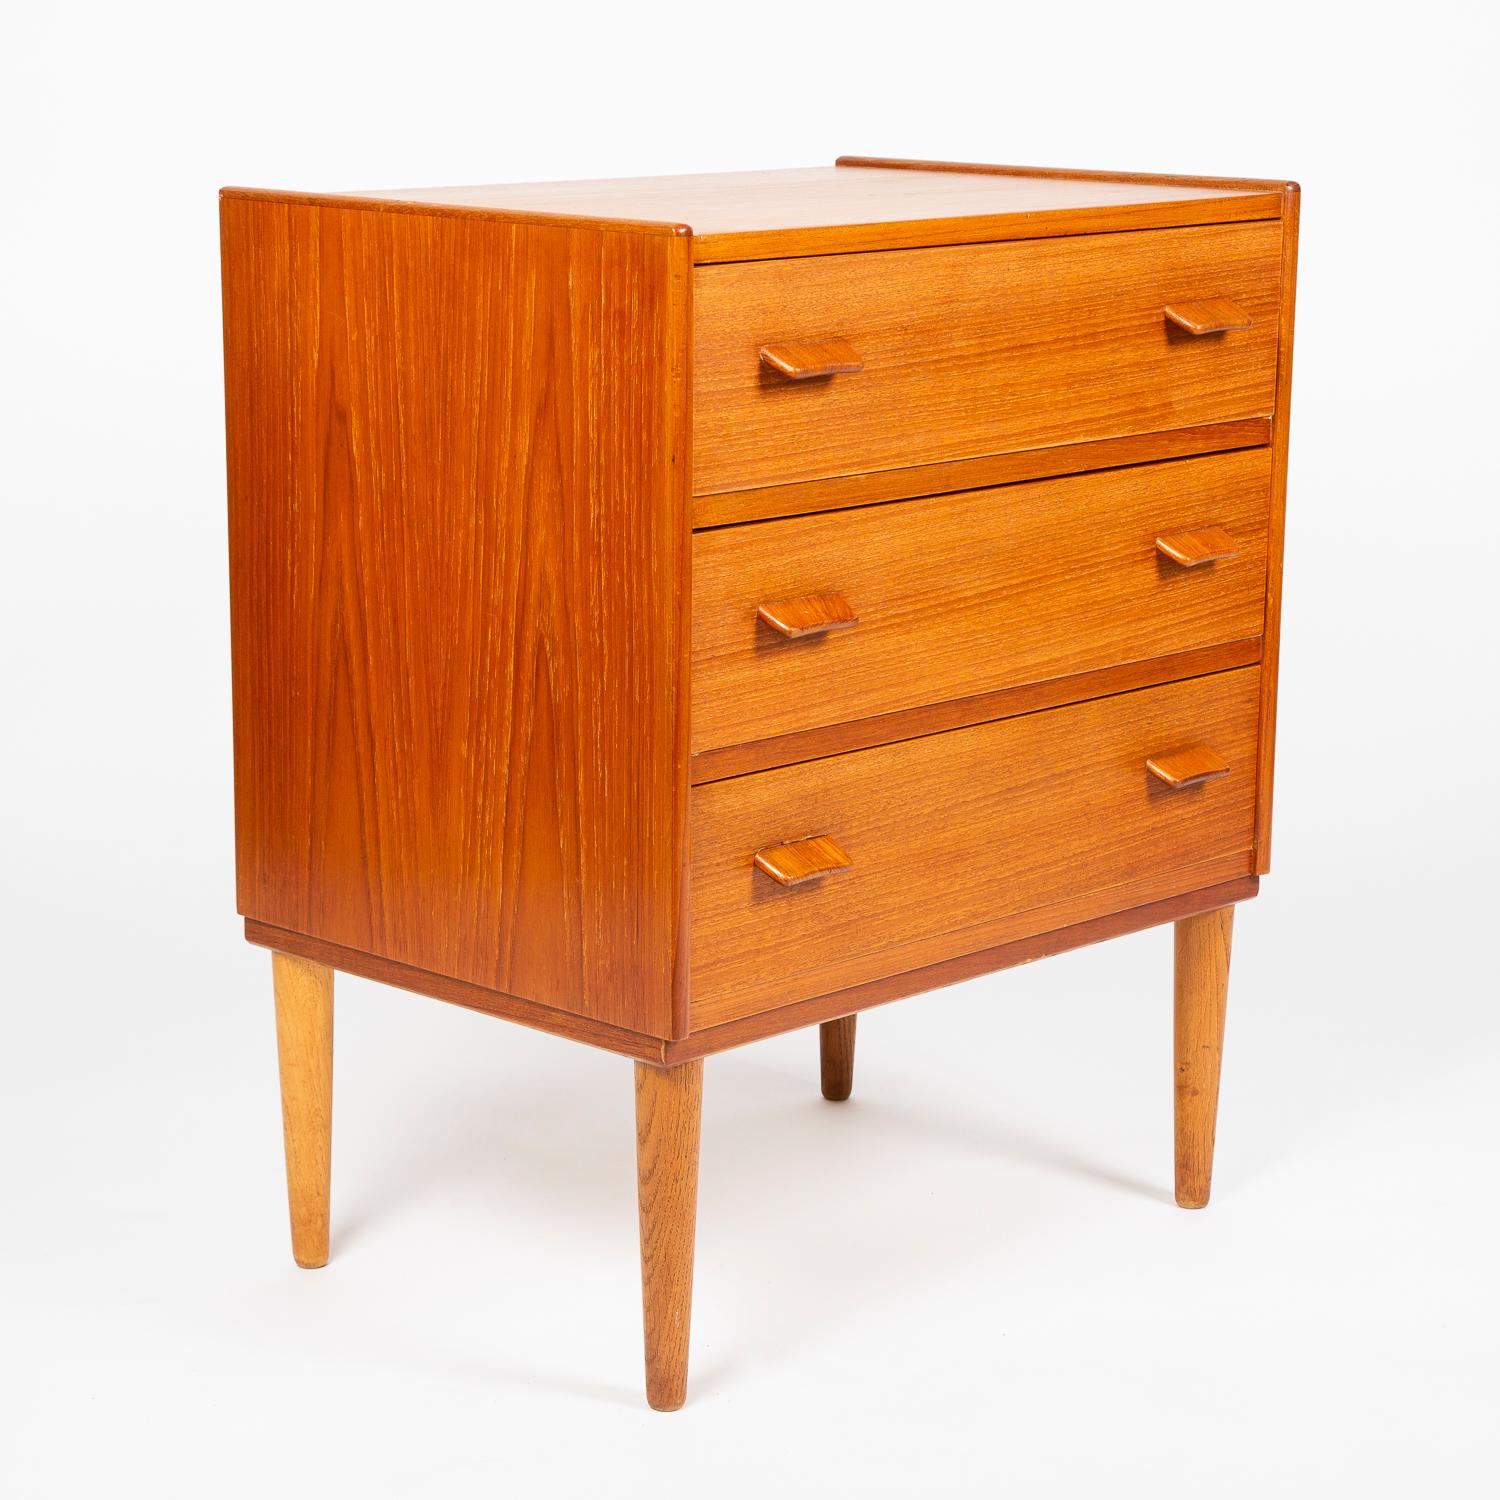 Scandinavian Modern Teak Chest of Drawers Design by Poul Volther